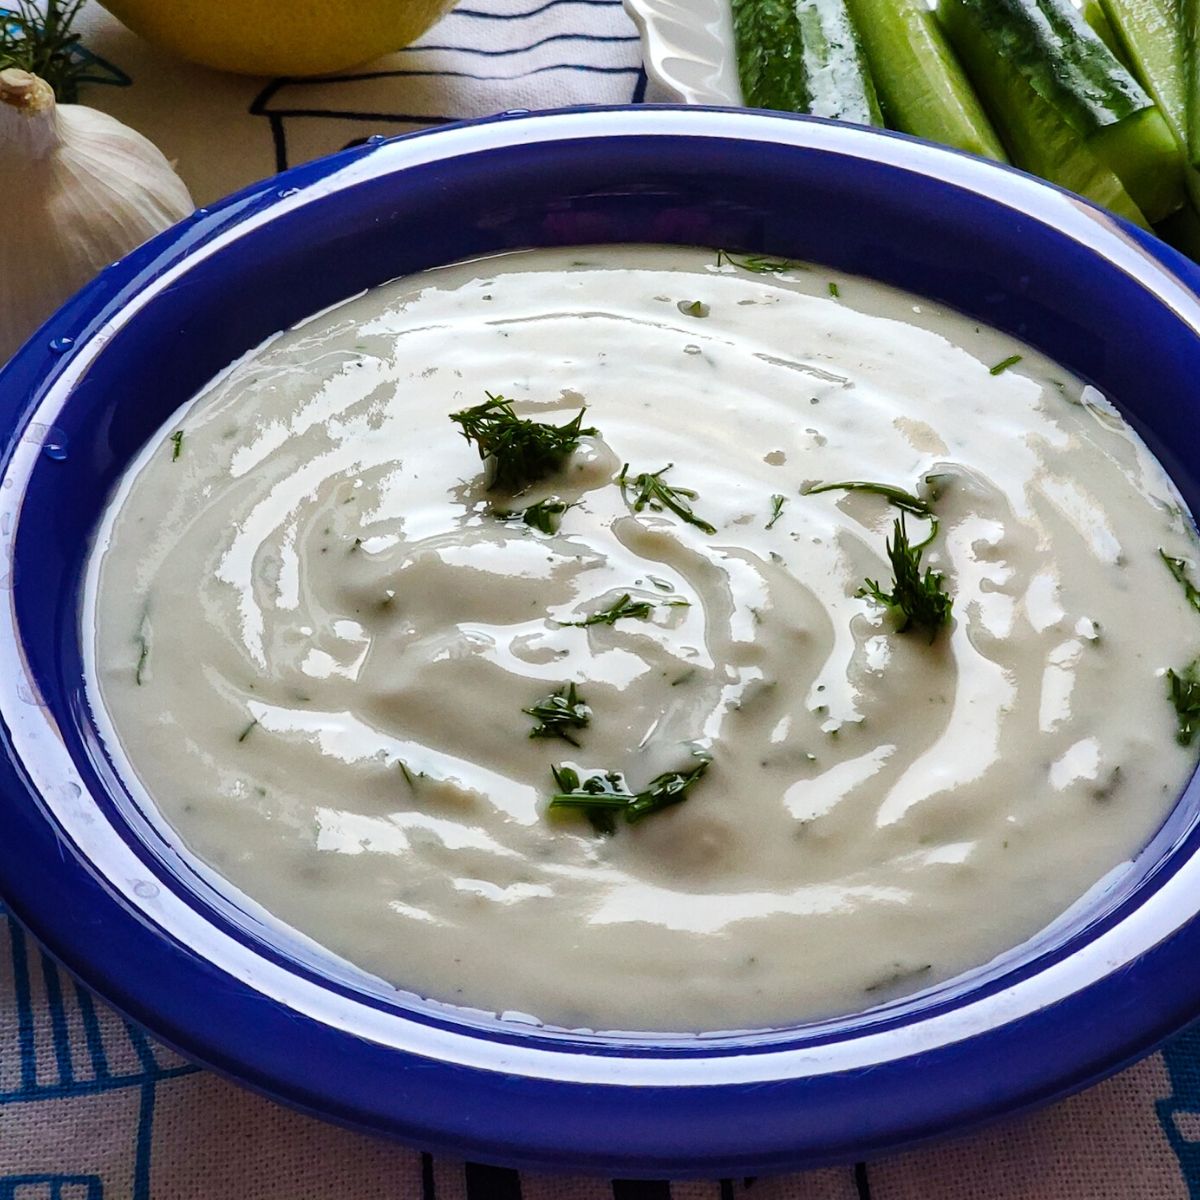 Greek Yogurt dip garnished with chopped dill served in a blue bowl